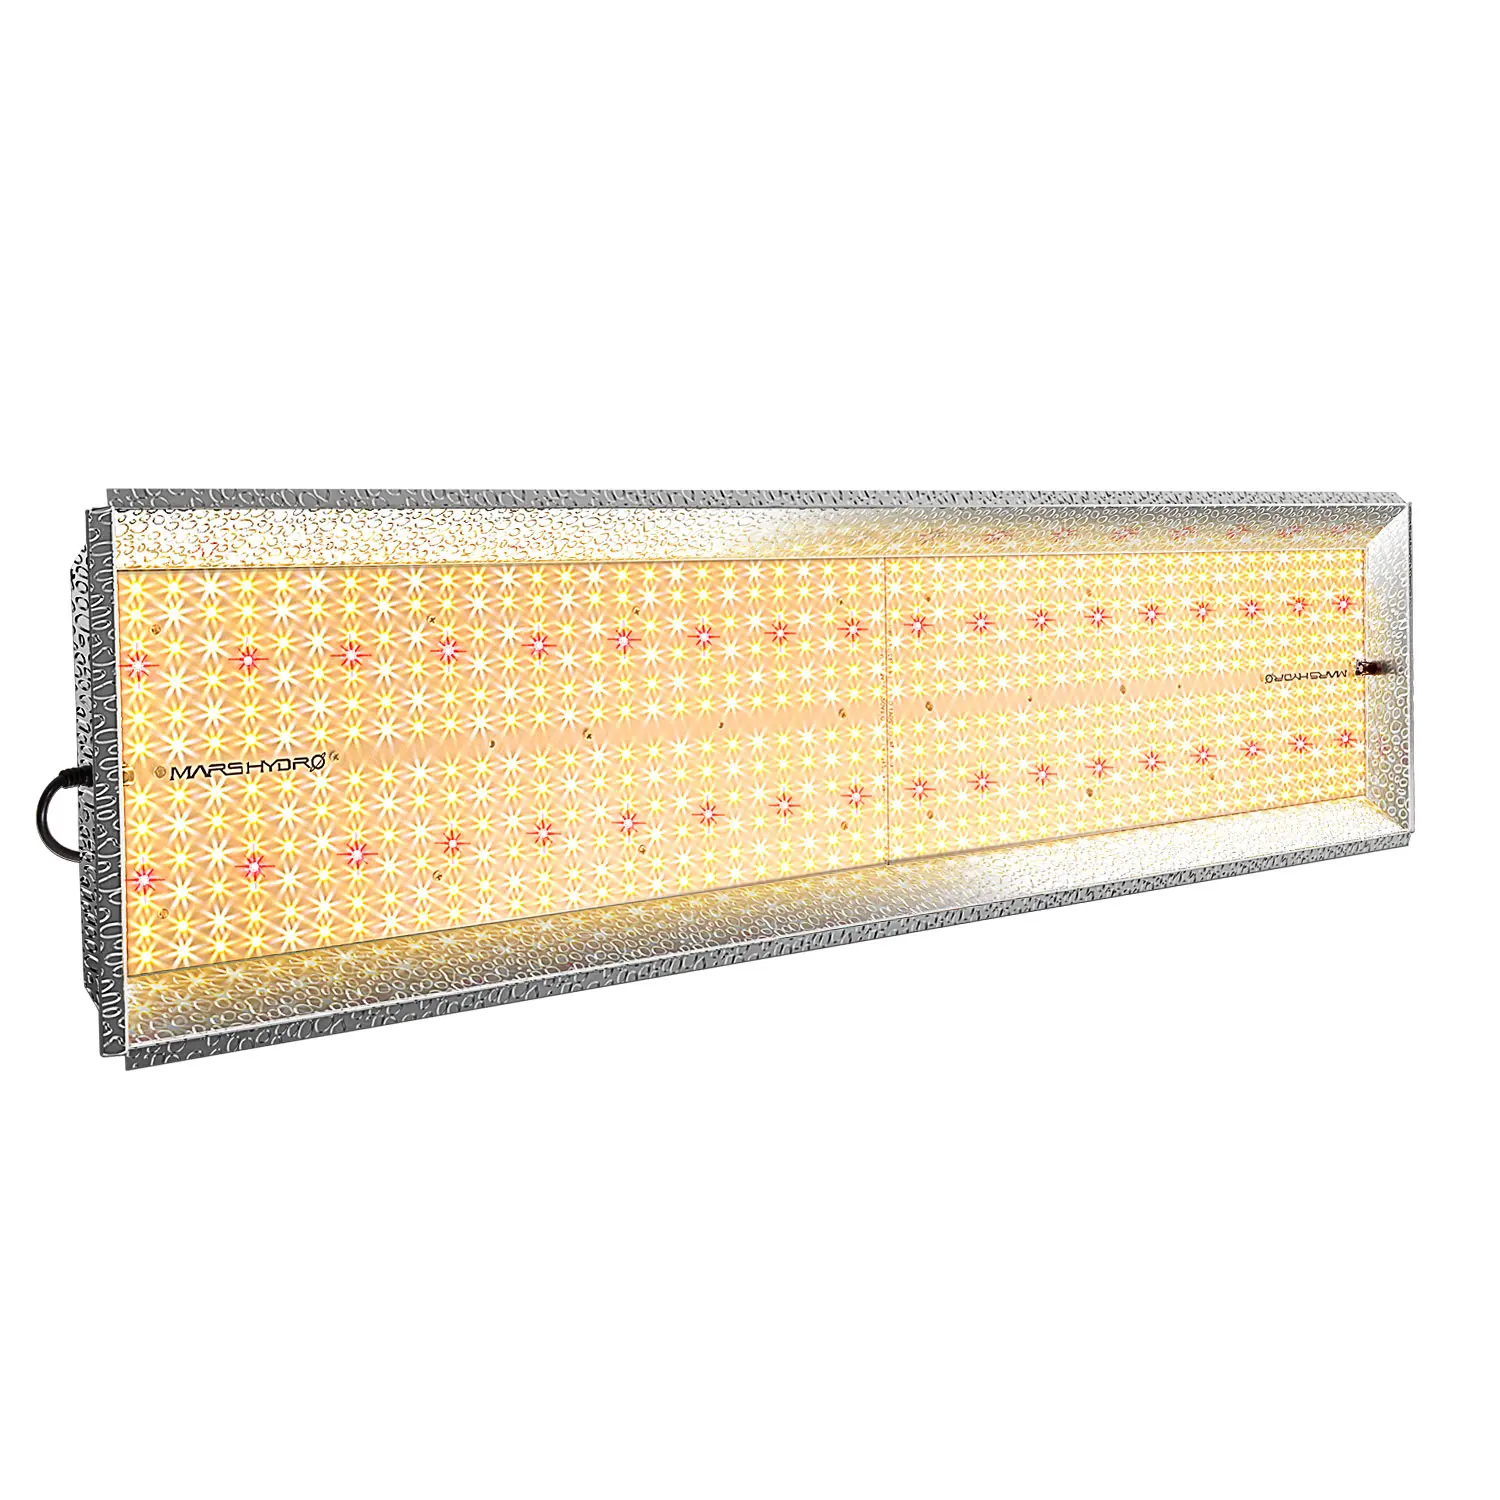 Cover 4ft by 2ft 300W Mars Hydro TSL-2000 Full Spectrum Led Grow lights for Indoor Cultivation